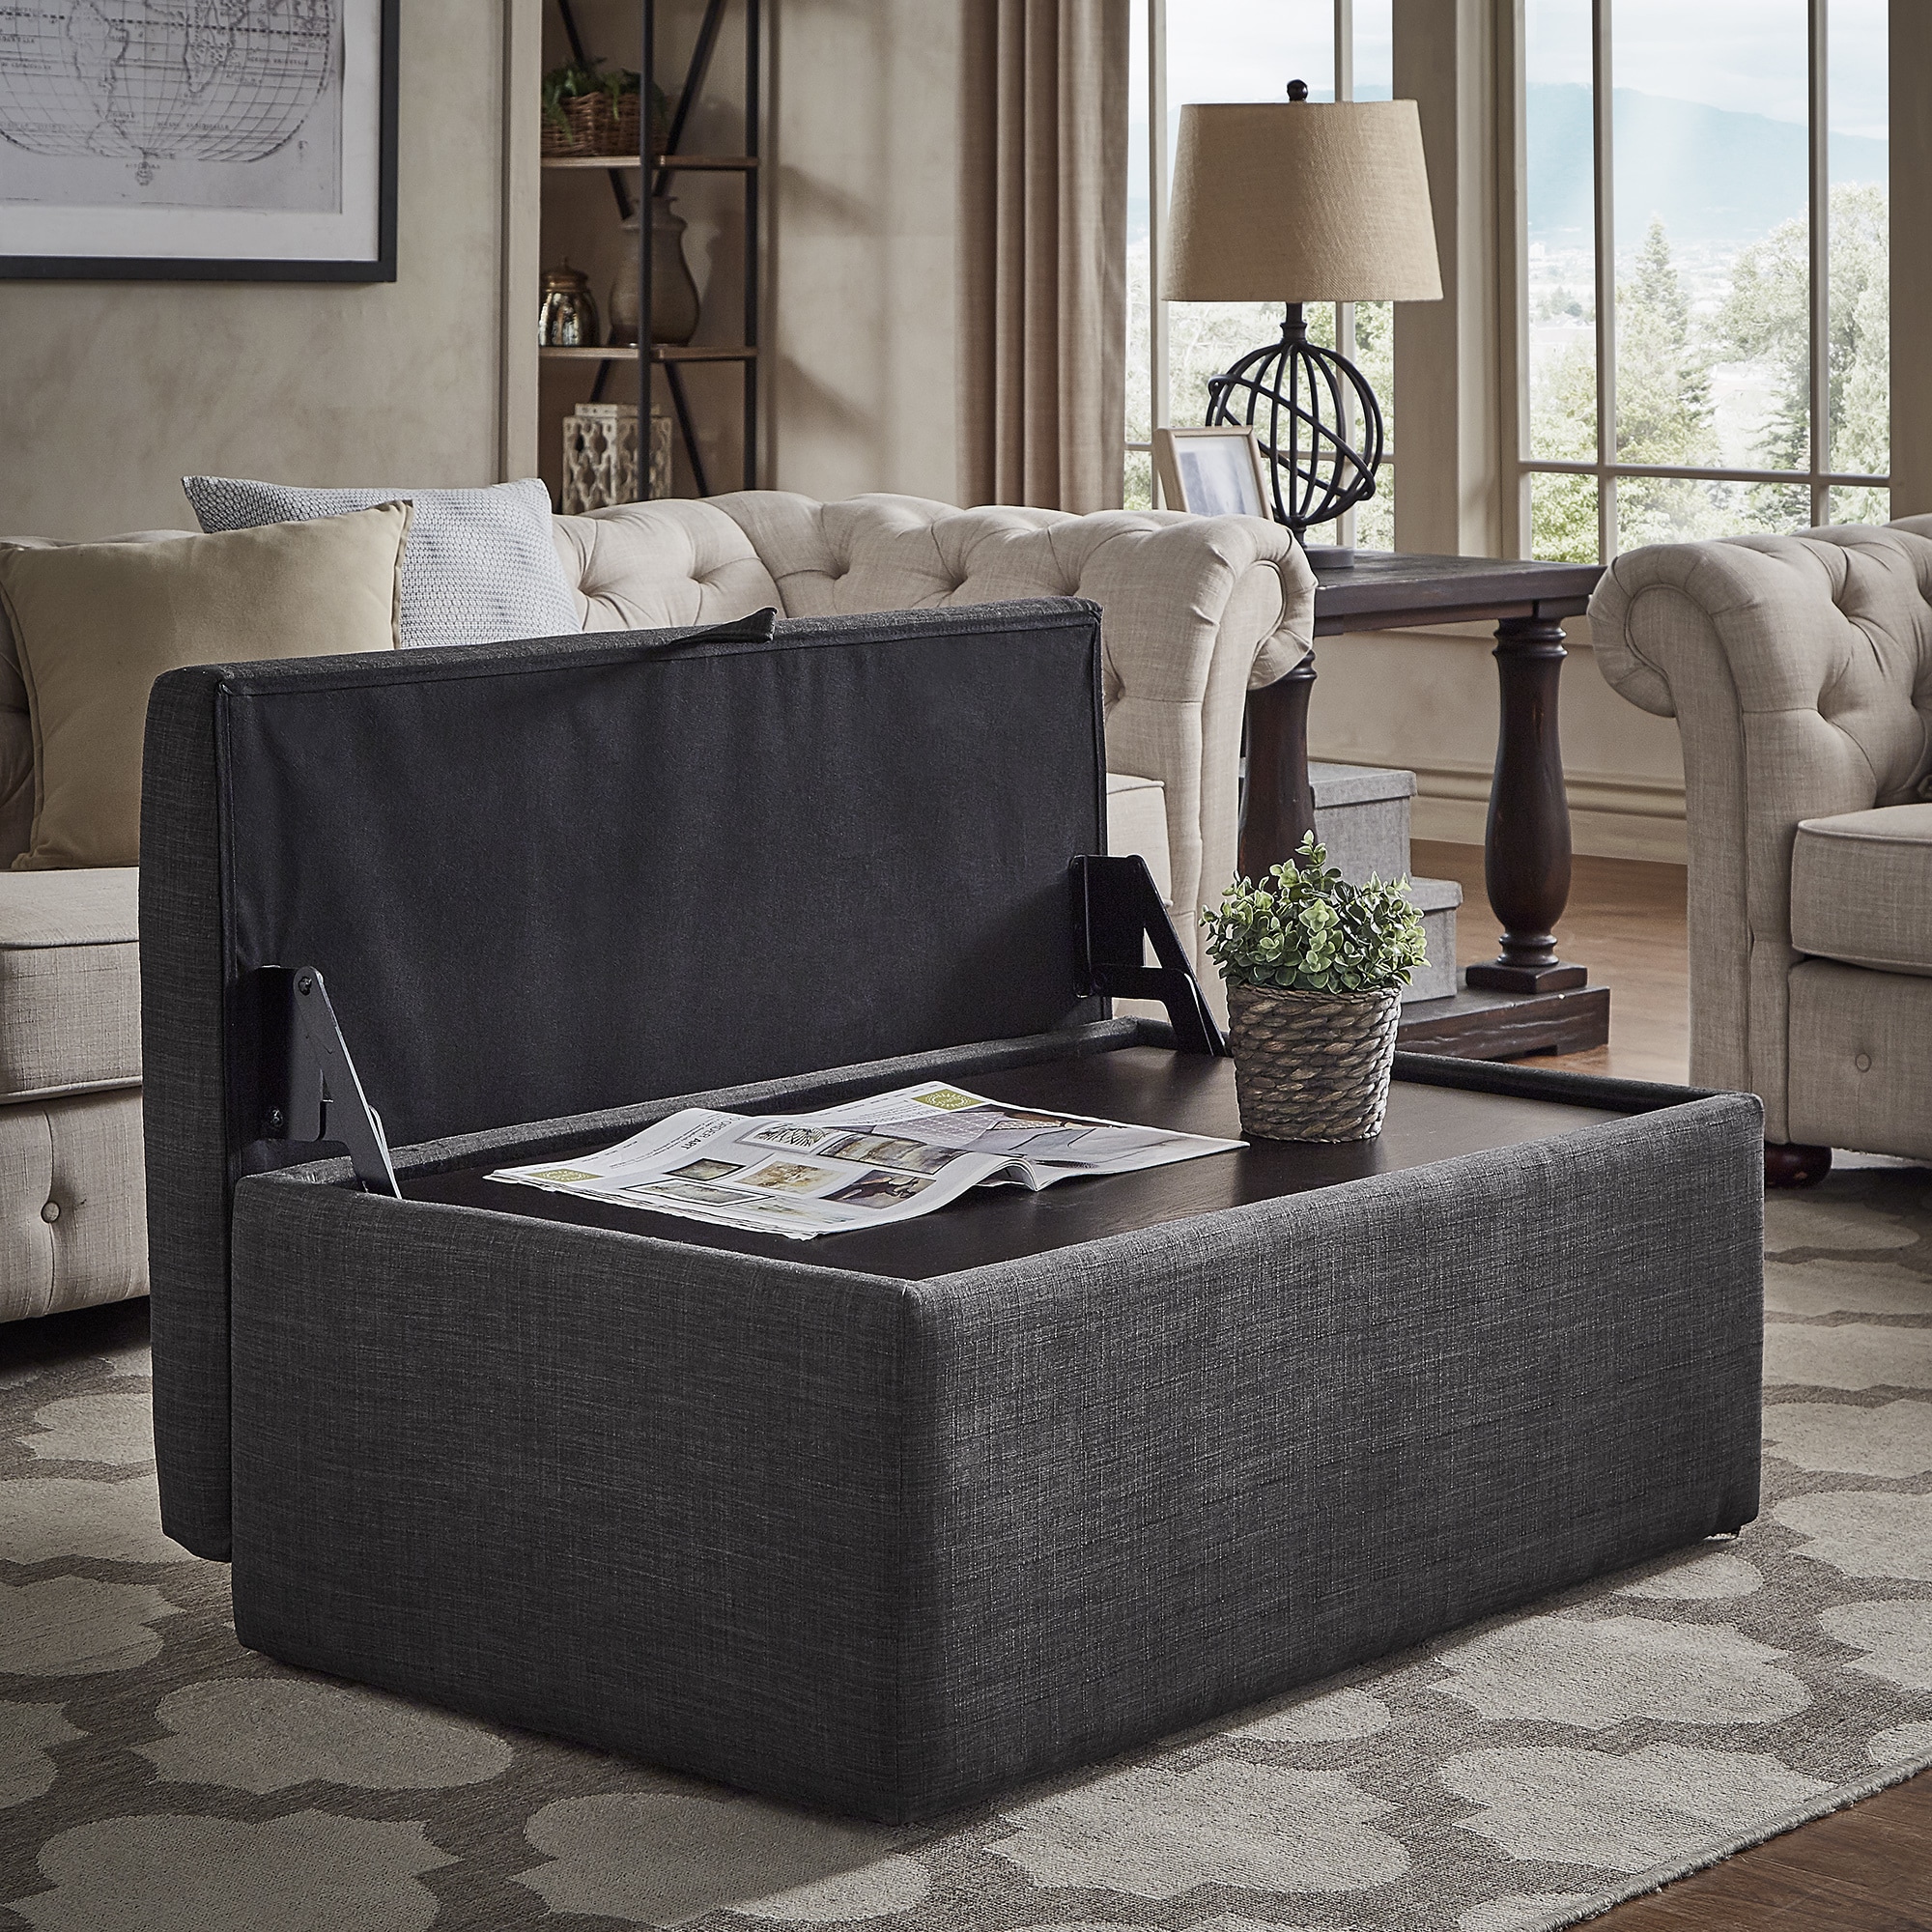 Landen Lift Top Upholstered Storage Ottoman Coffee Table - Storage